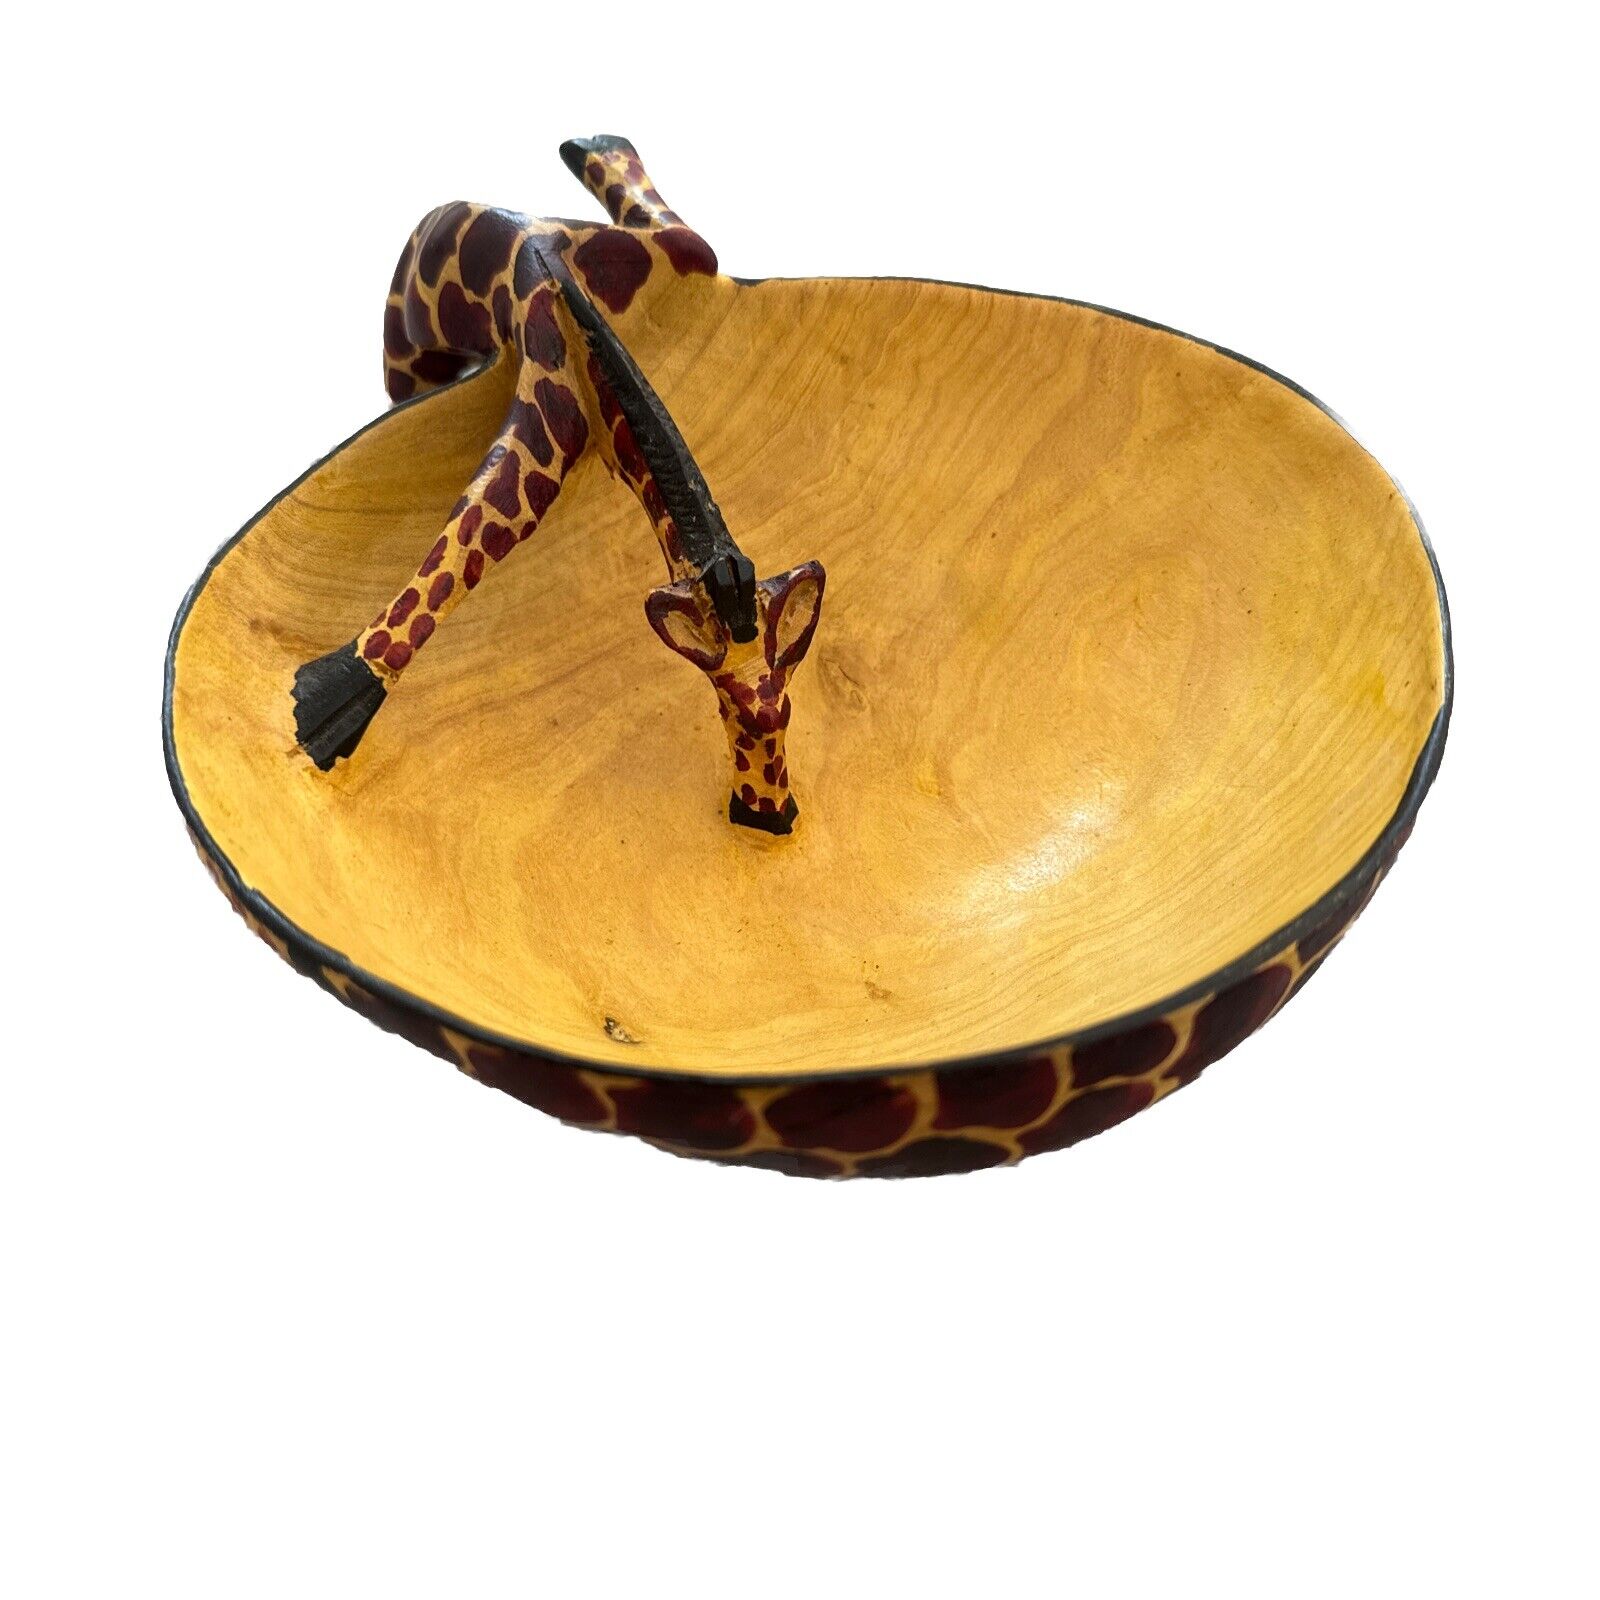 Giraffe Leaning Over Bowl Wood Hand Carved African Art Animal Print Unique Vtg